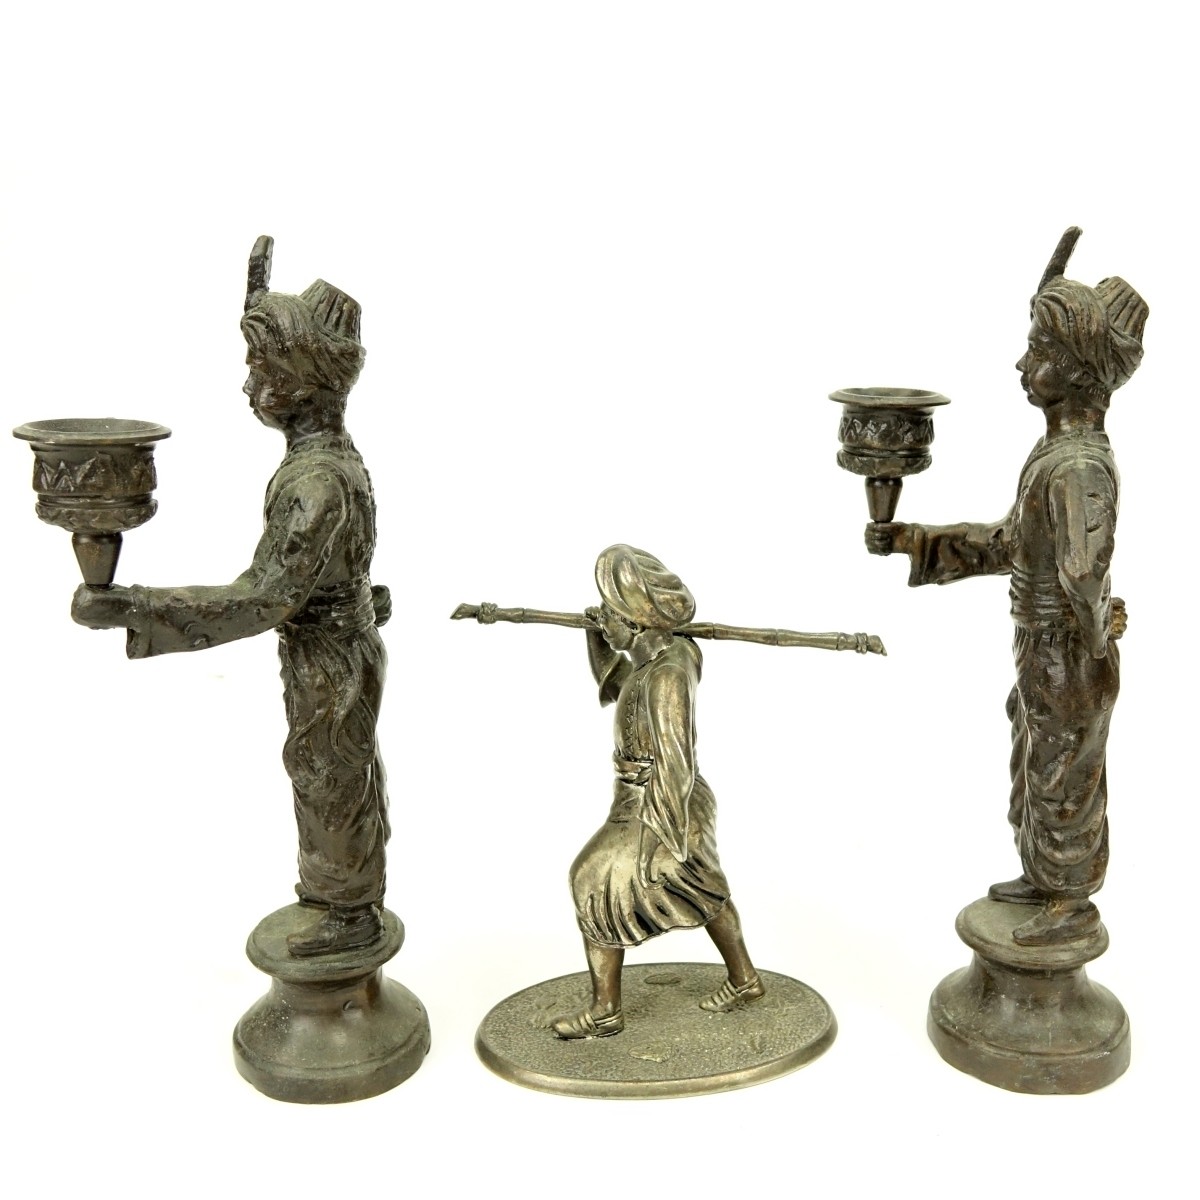 Grouping of Three Orientalist Figural Sculptures